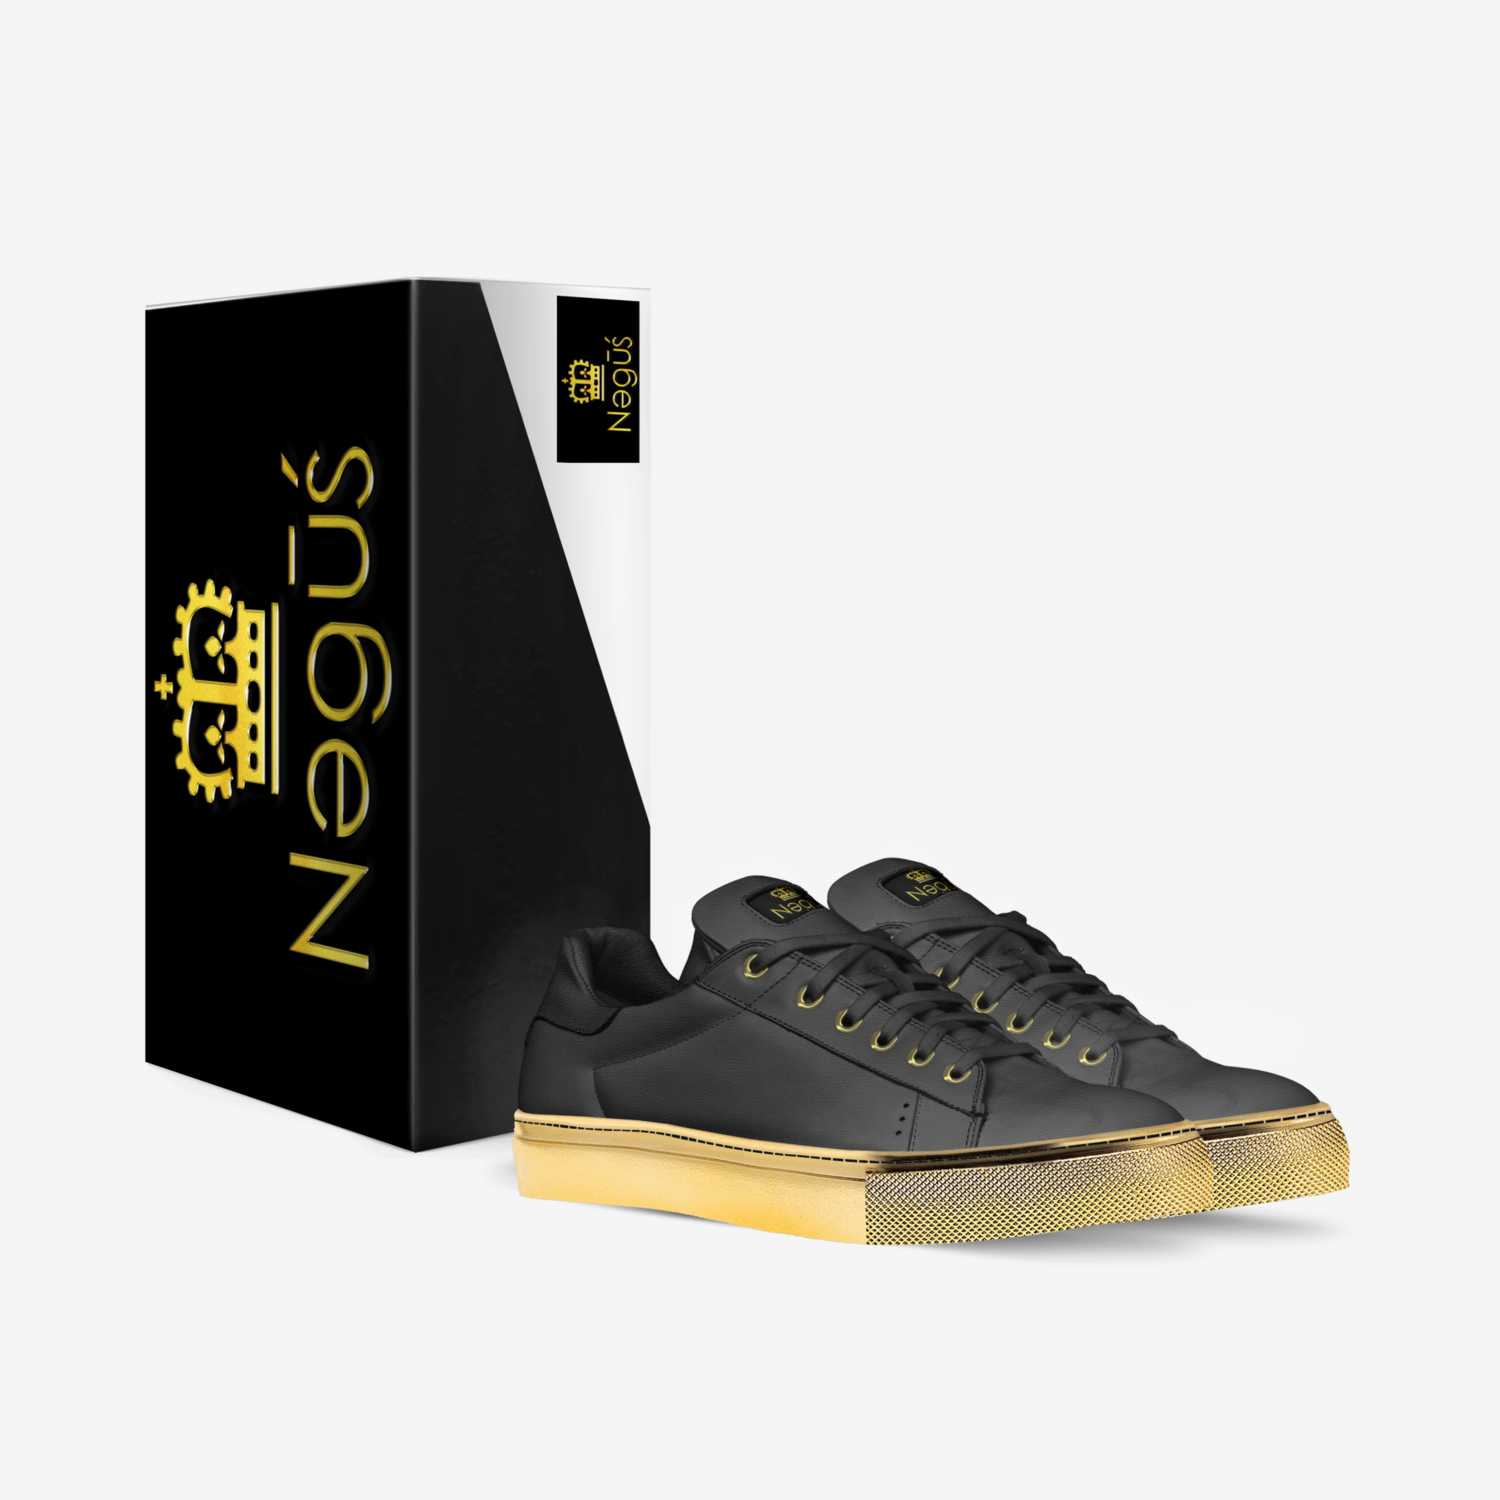 NEGUS  custom made in Italy shoes by Negus Mills | Box view